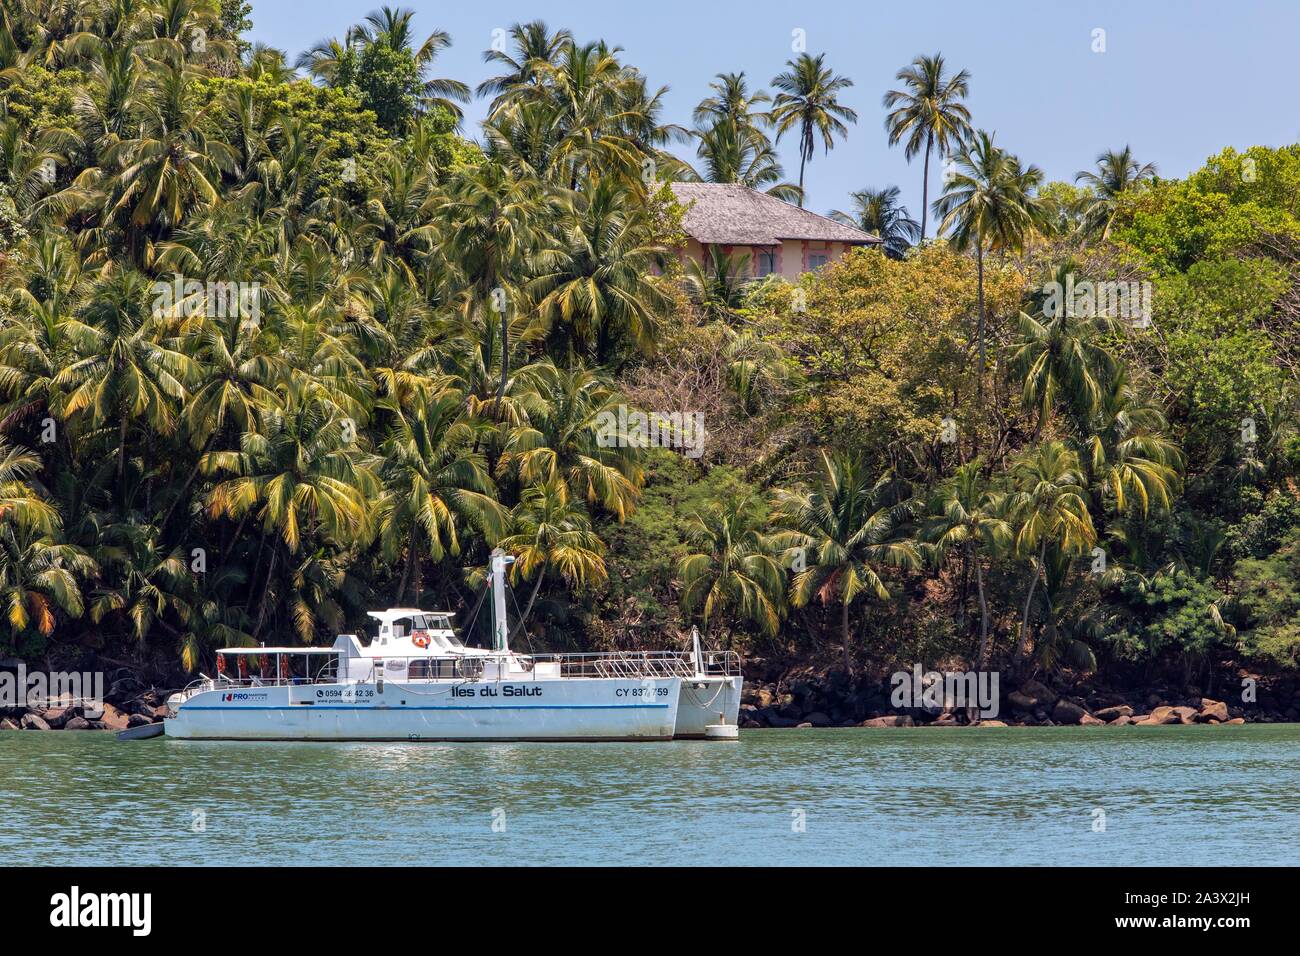 CATAMARAN IN FRONT OF ILE ROYALE, SALVATION'S ISLANDS, KOUROU, FRENCH GUIANA, OVERSEAS DEPARTMENT, SOUTH AMERICA, FRANCE Stock Photo